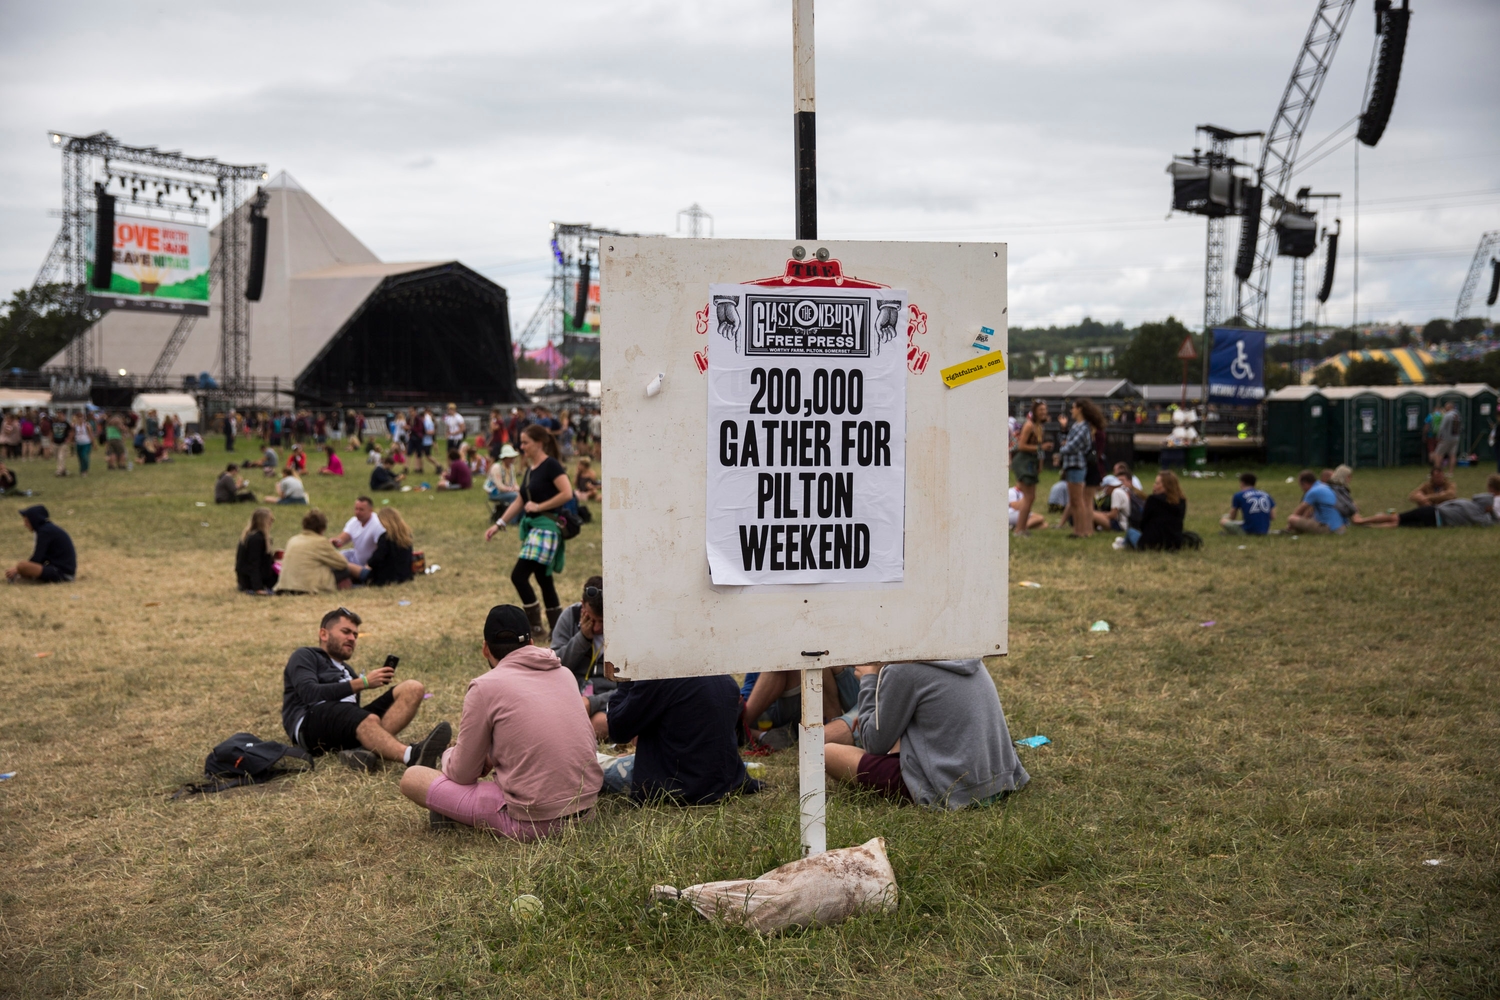 Glastonbury Festival allowed to increase capacity - but not this year